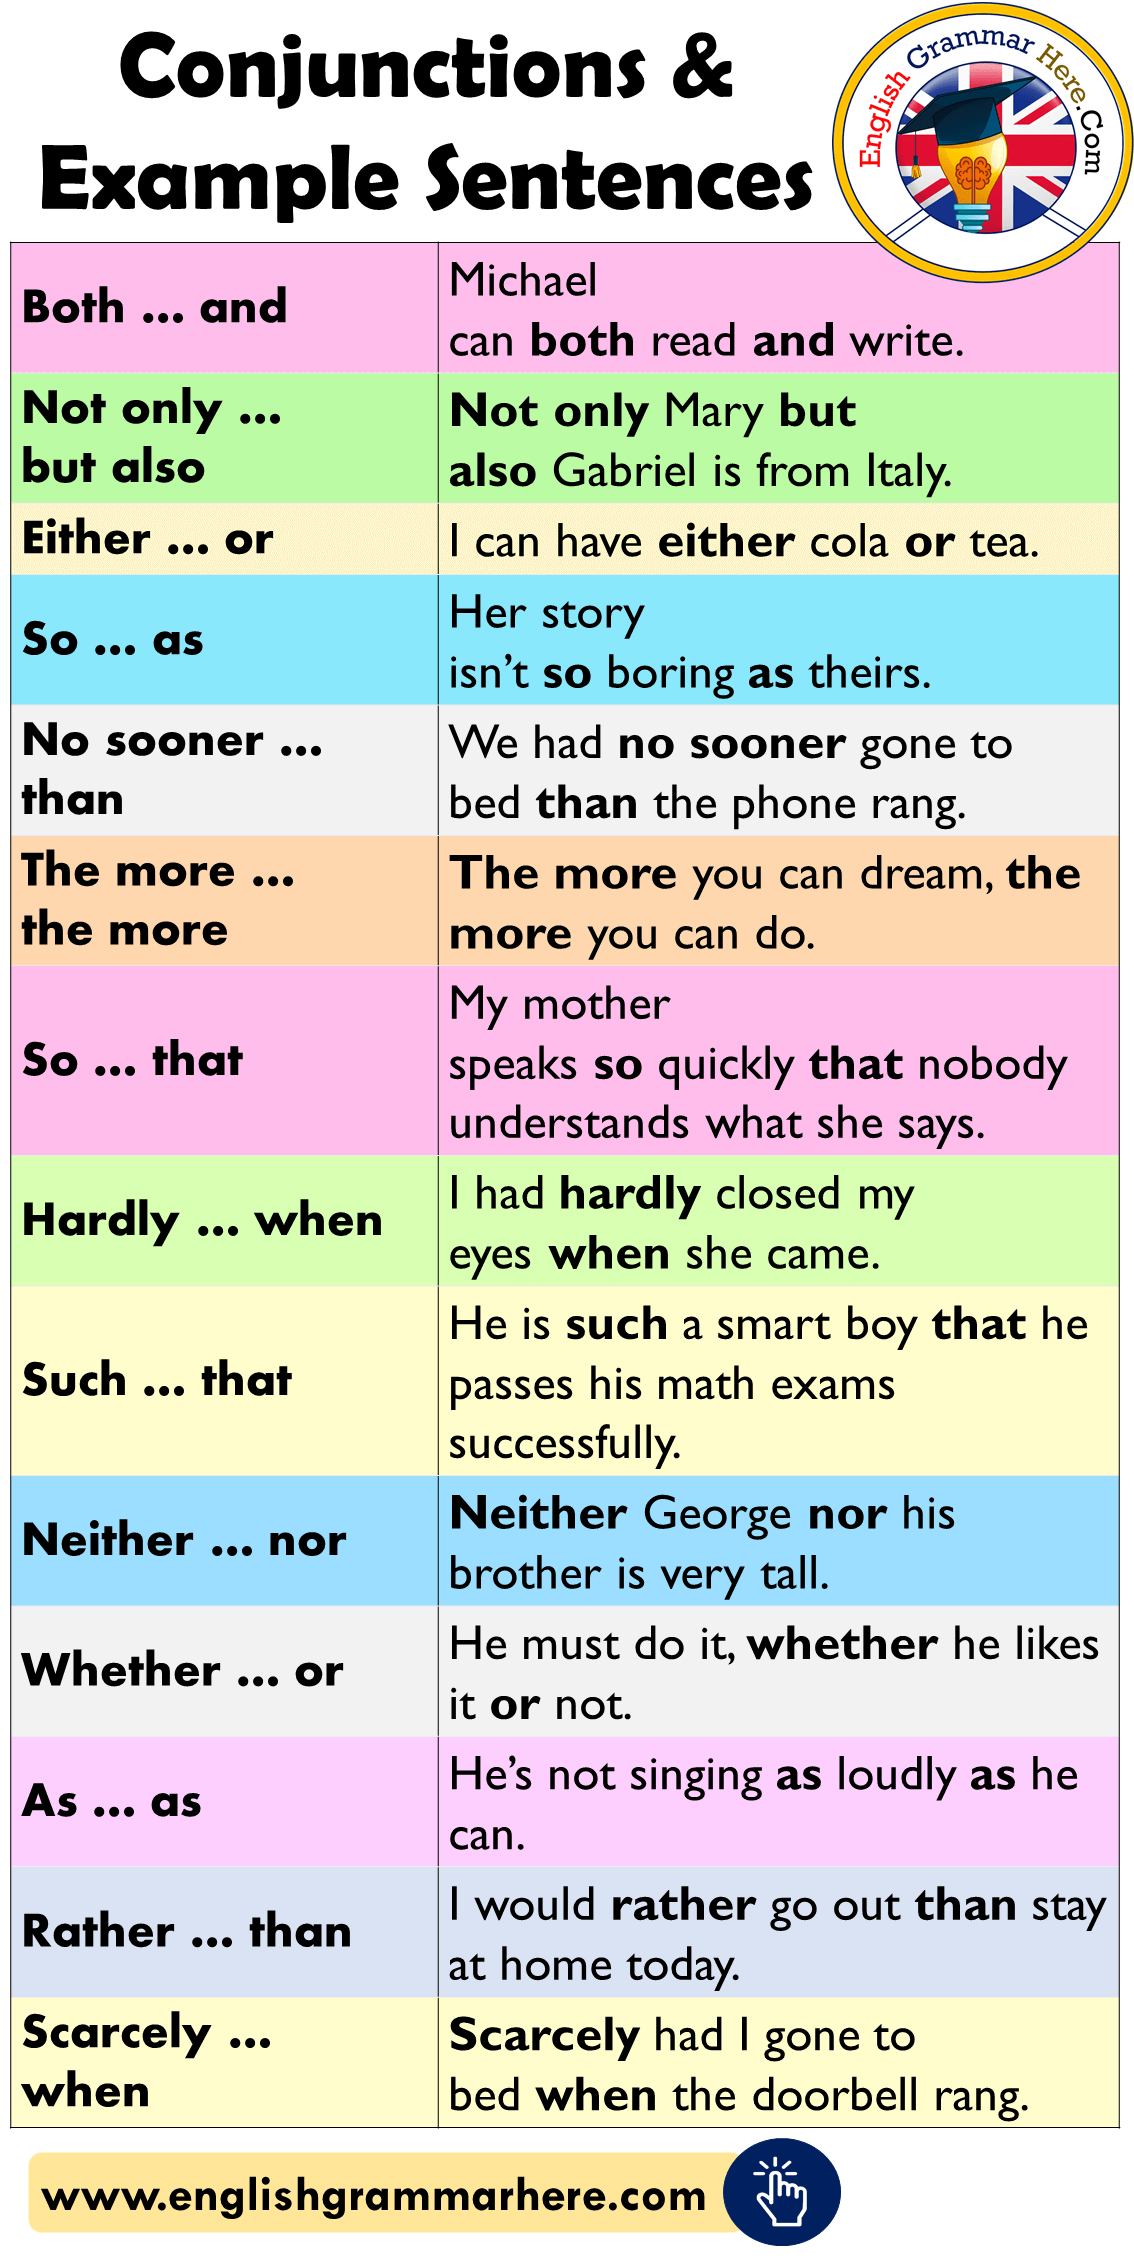 Conjunctions List and Example Sentences - English Grammar Here